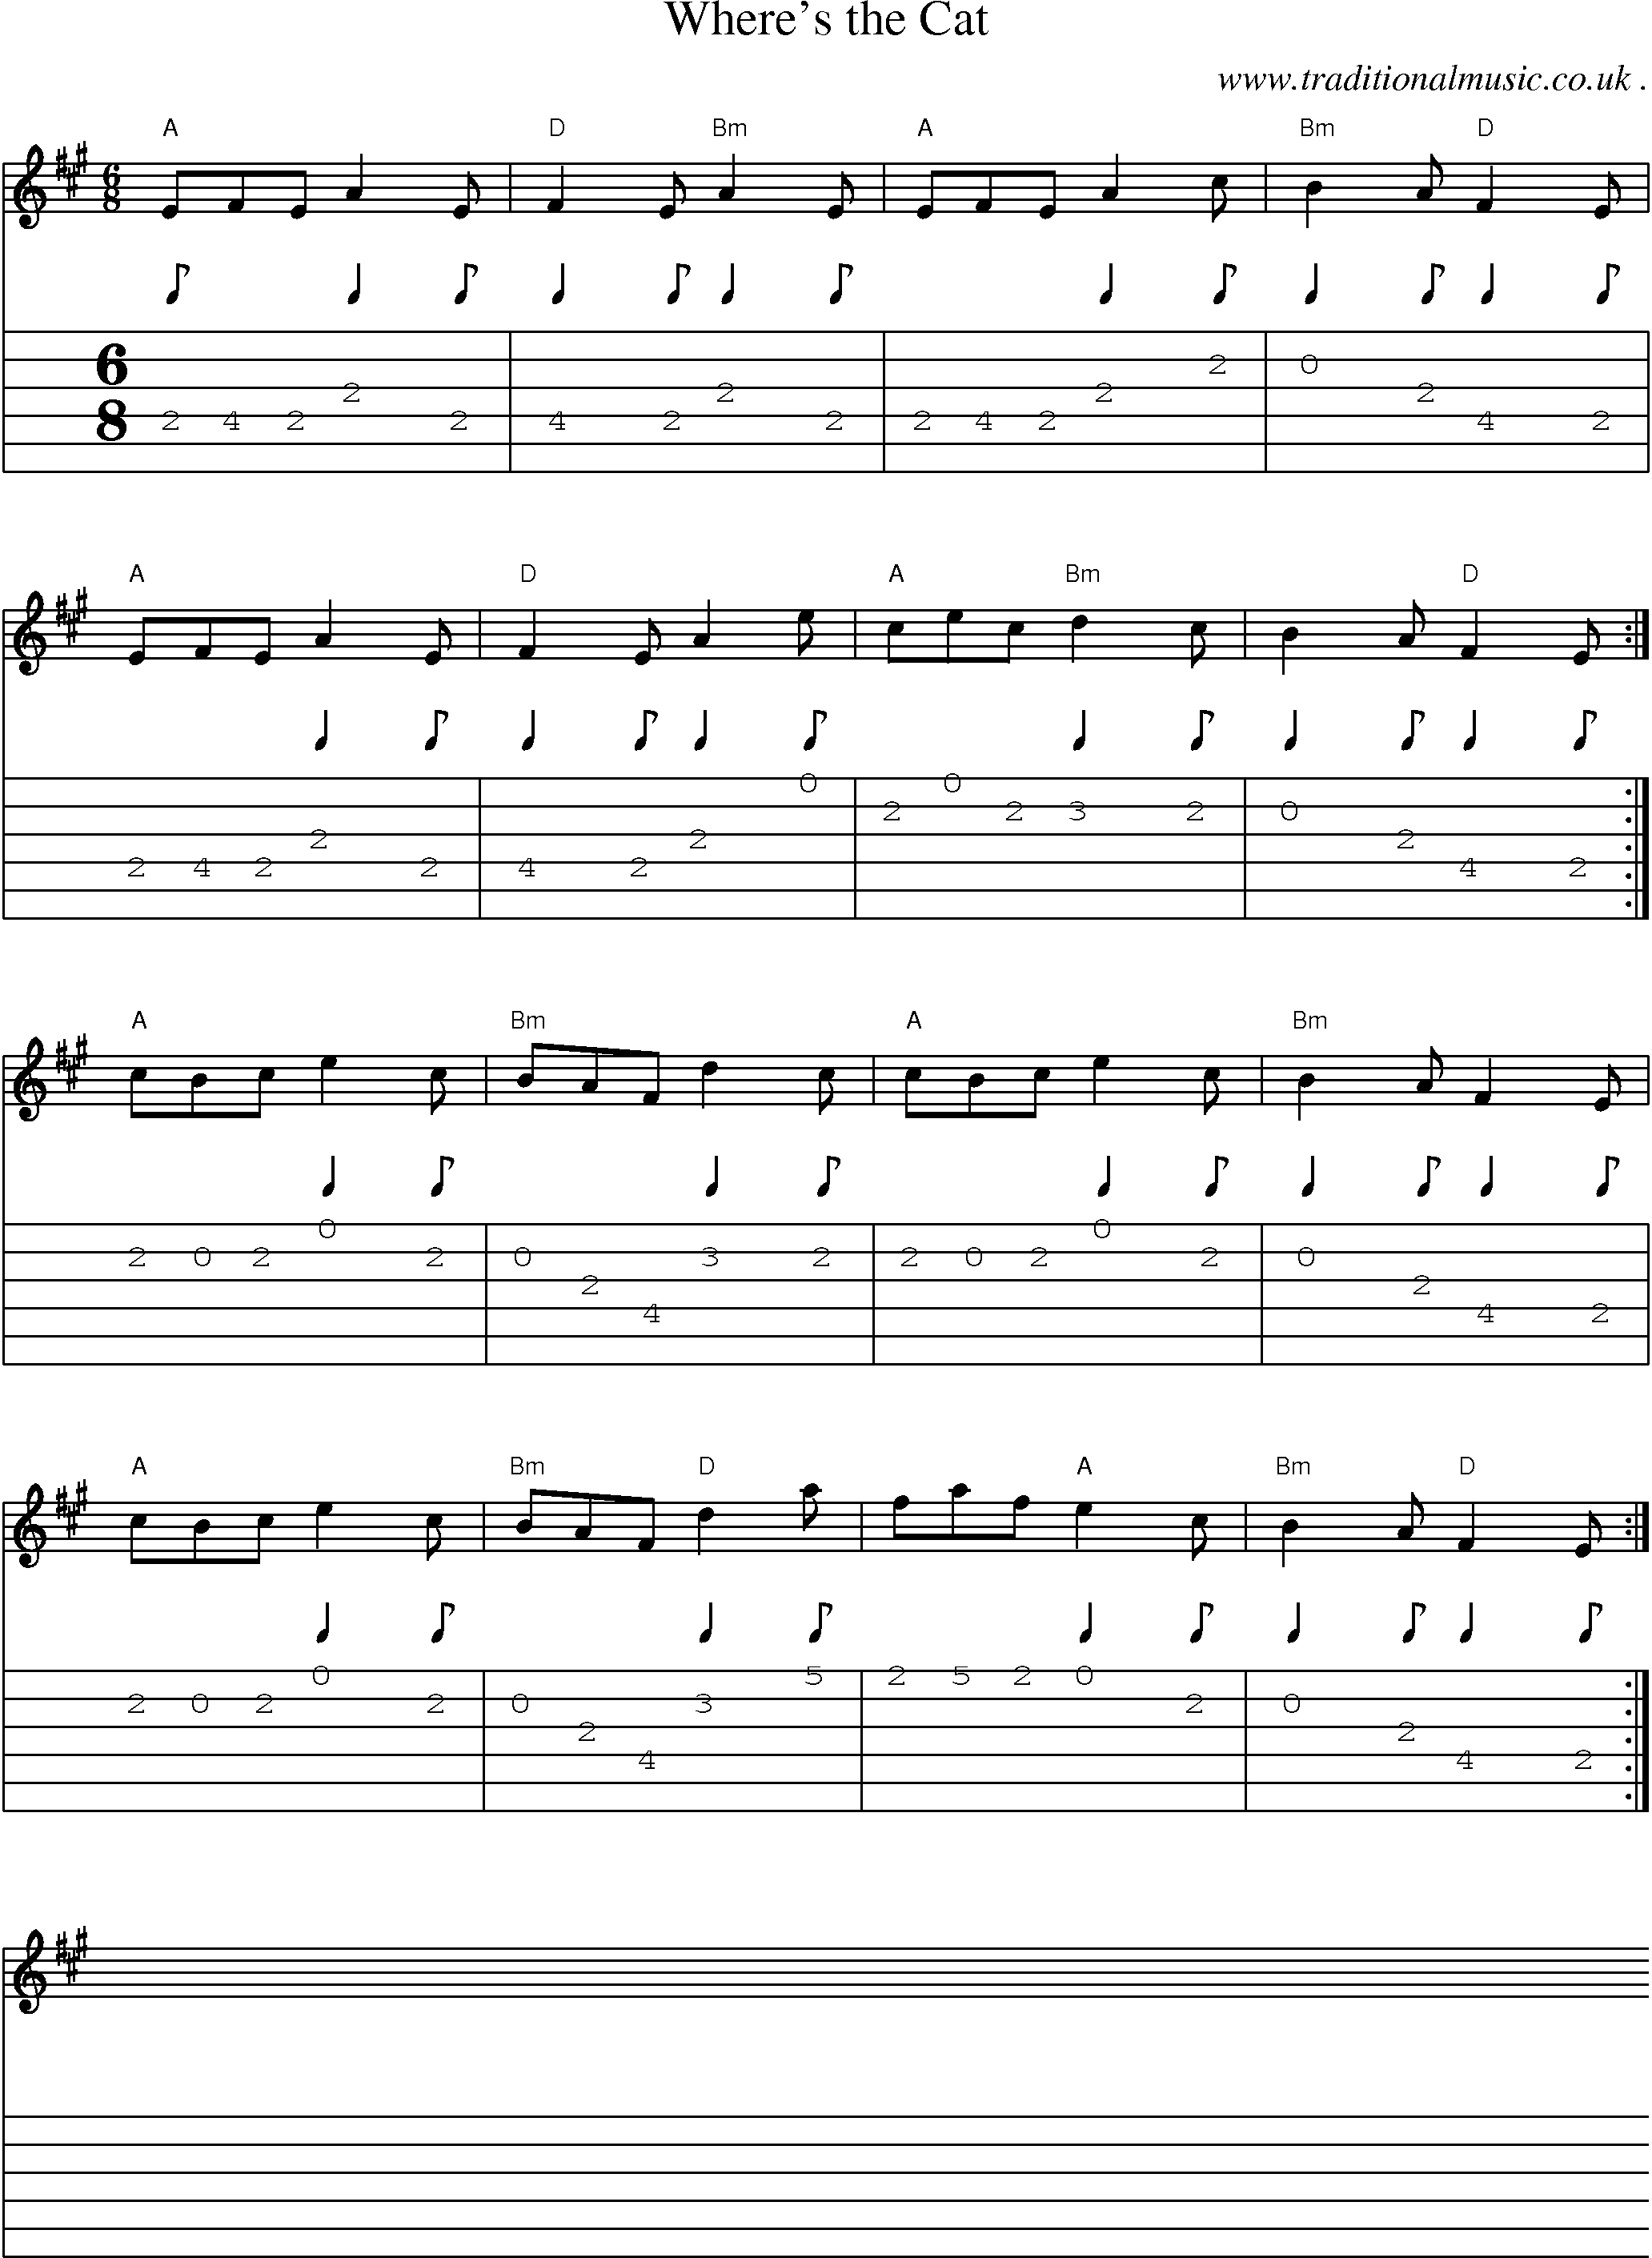 Sheet-music  score, Chords and Guitar Tabs for Wheres The Cat